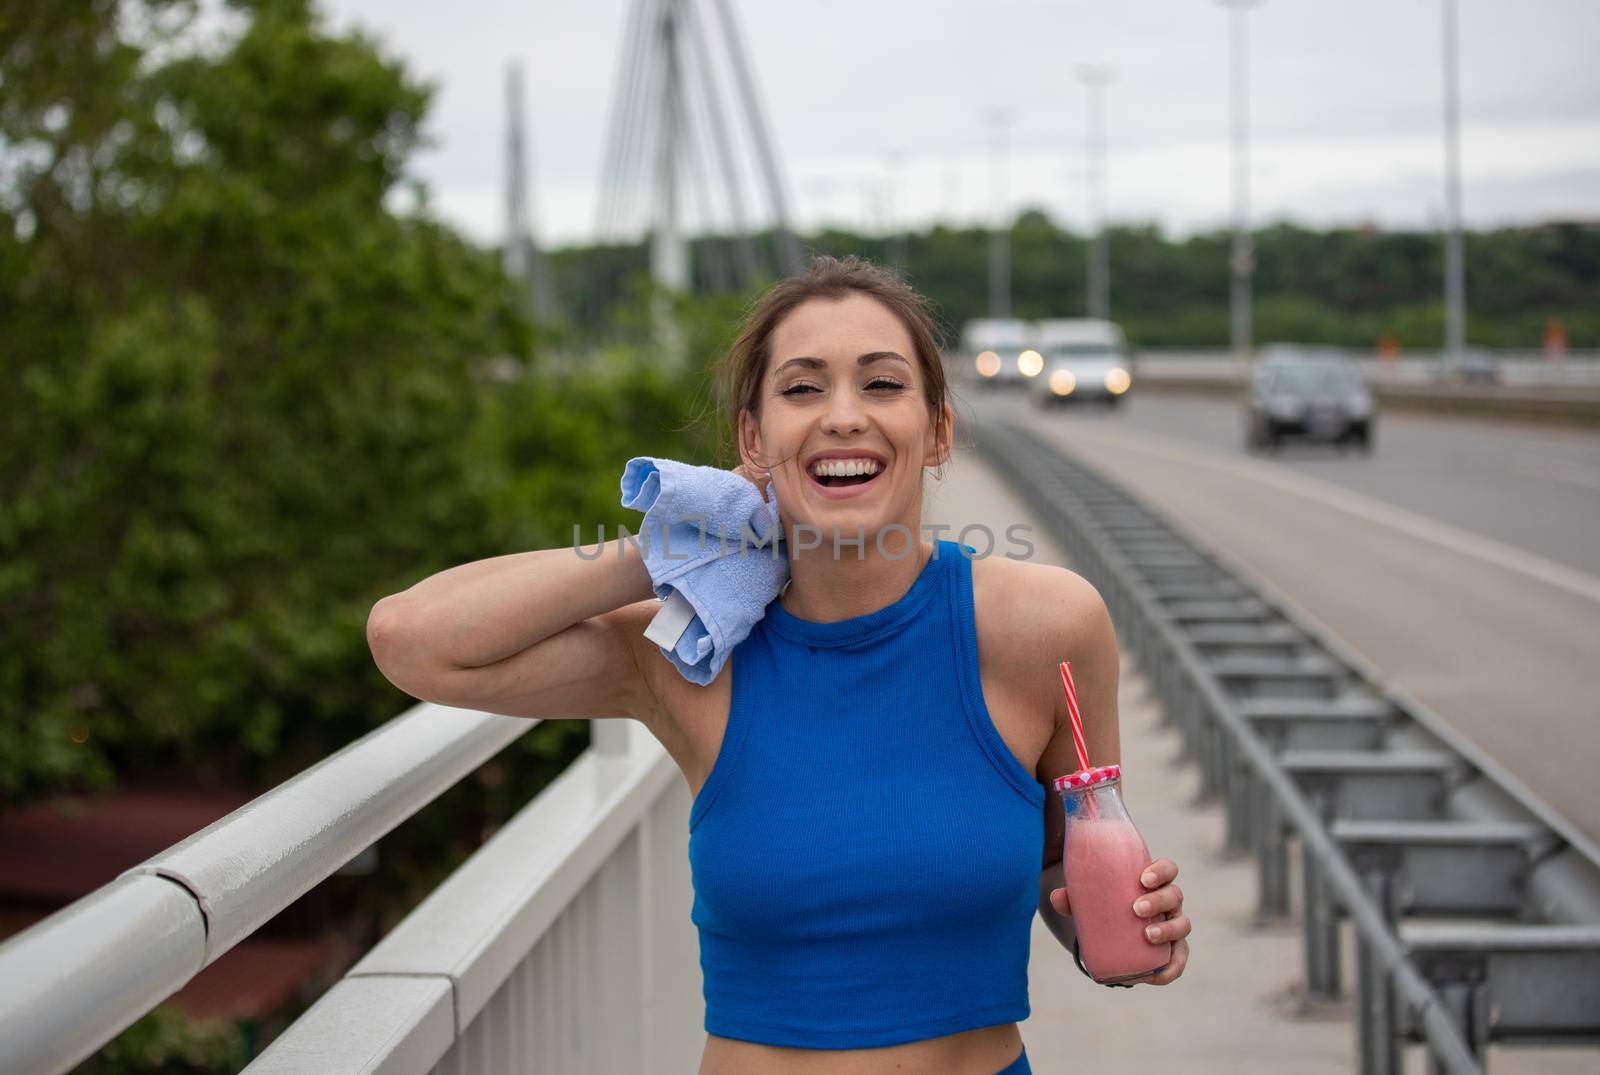 Young woman resting after workout wiping sweat smiling. Athlete hydrating having strawberry milkshake on bridge.